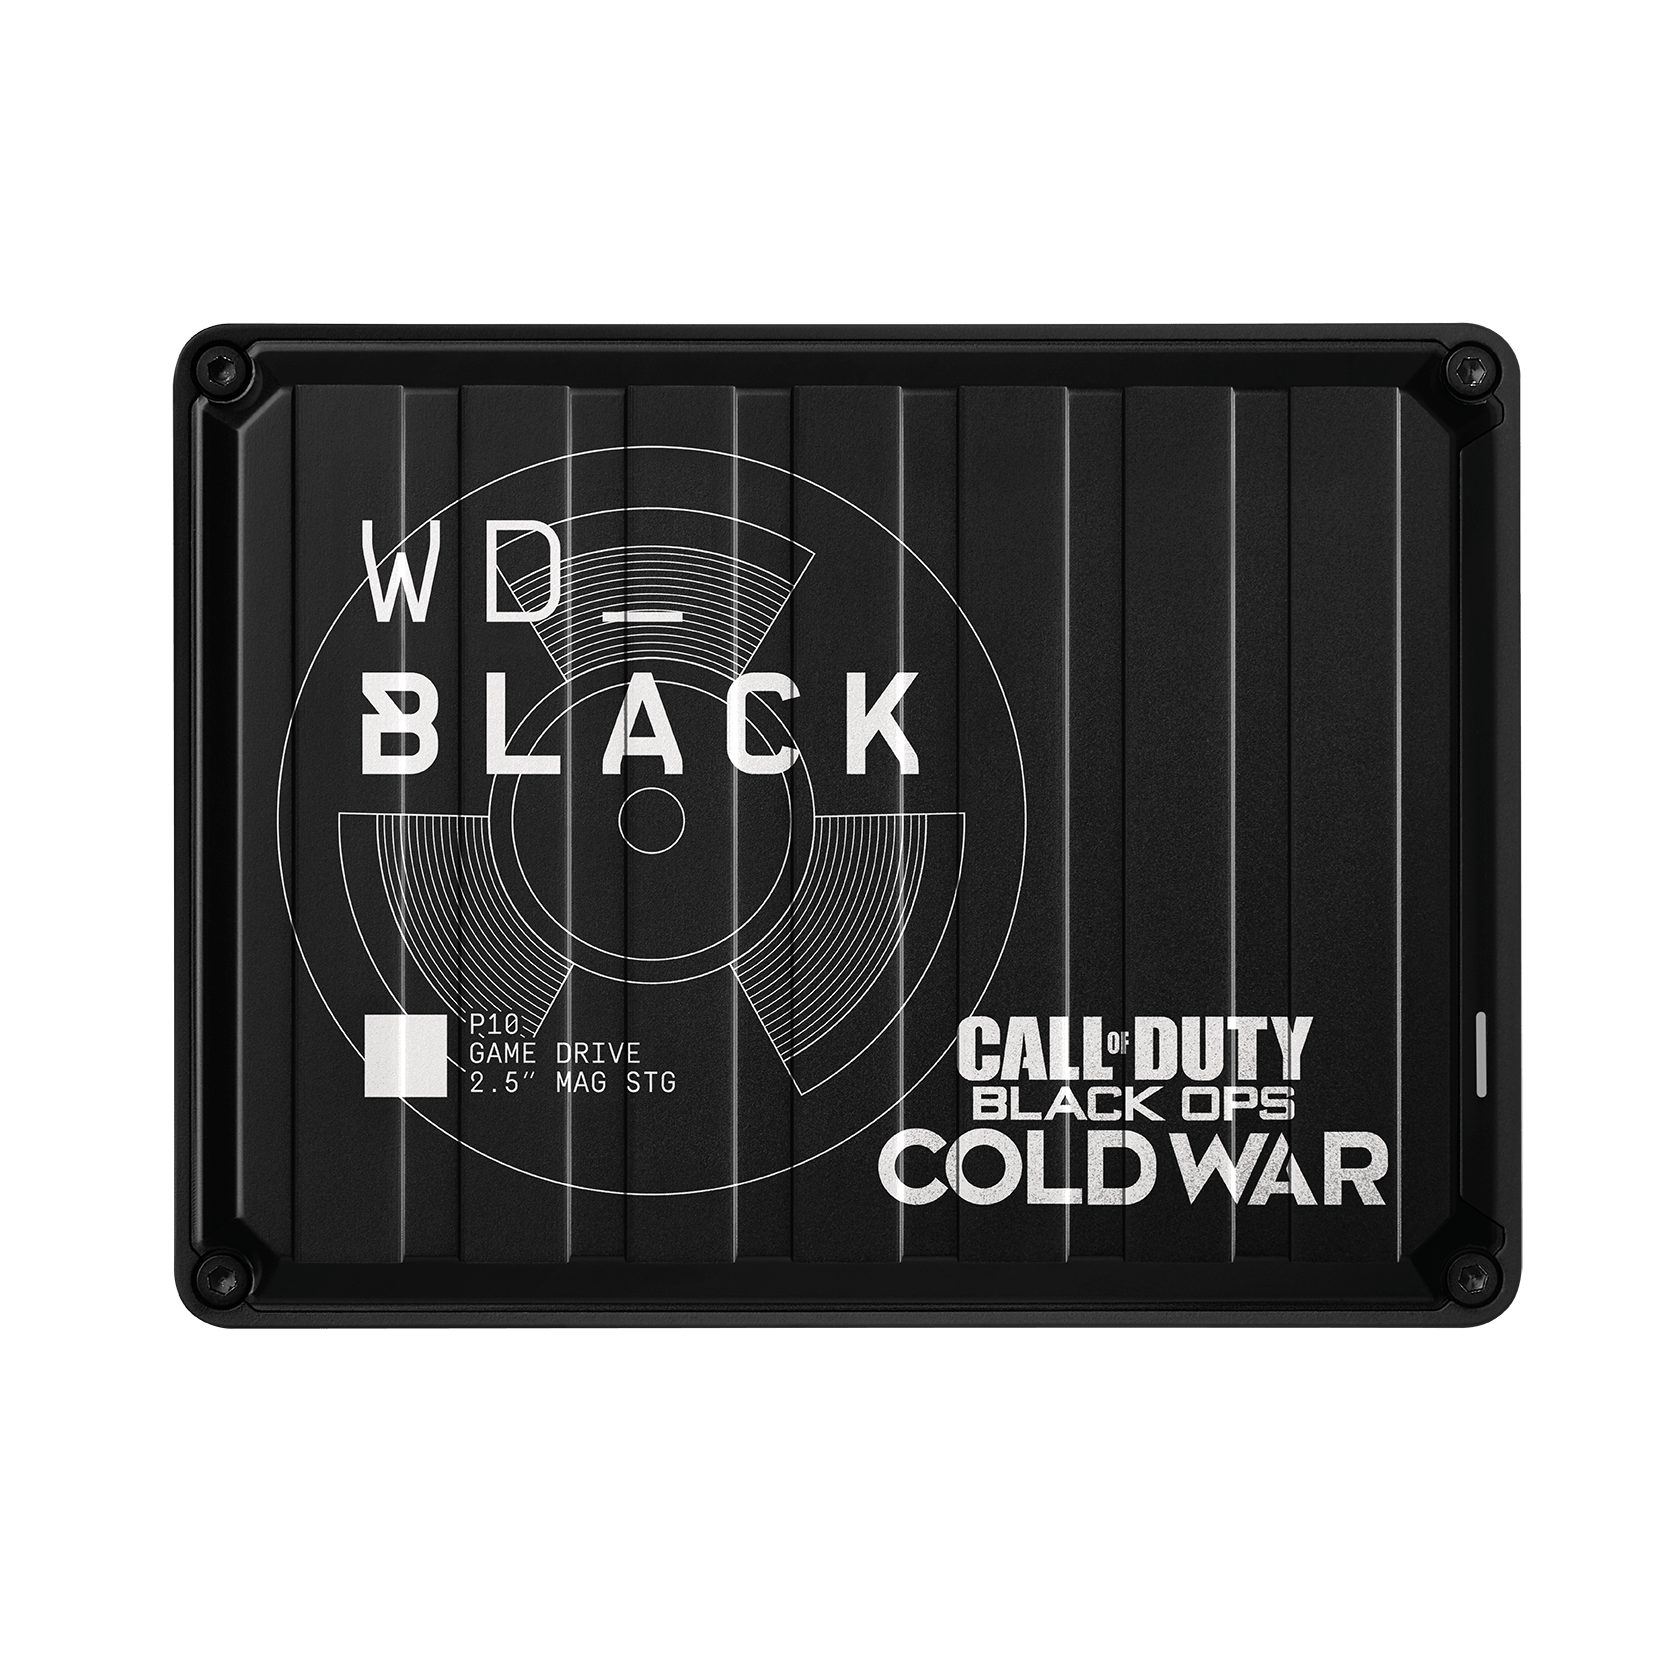 WD_BLACK 2TB Call of Duty: Black Ops Cold War Special Edition P10 Game Drive, Portable External Hard Drive - WDBAZC0020BBK-WESN - image 1 of 7